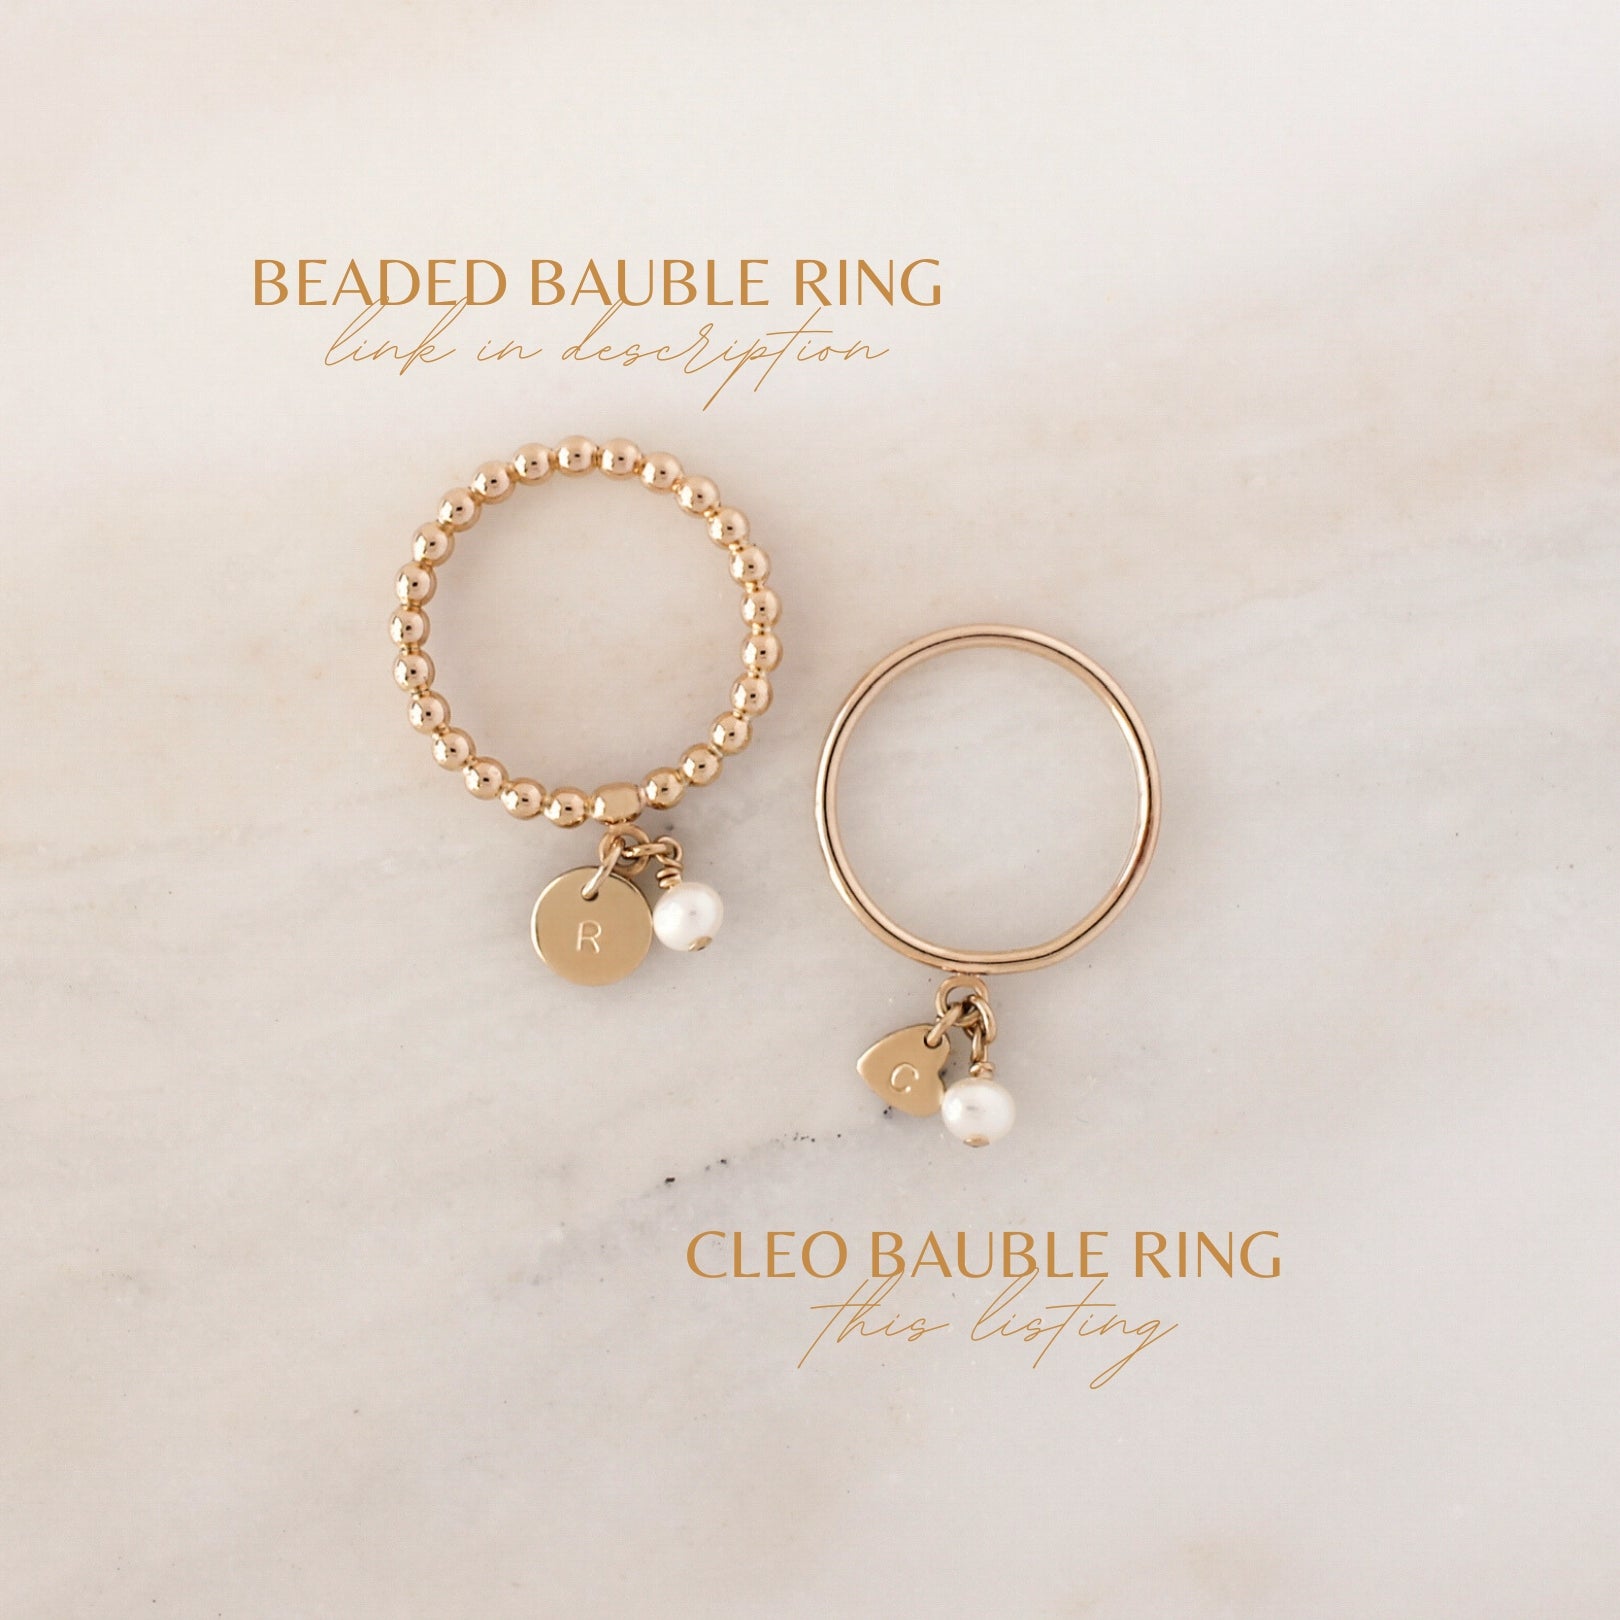 Cleo Bauble Ring